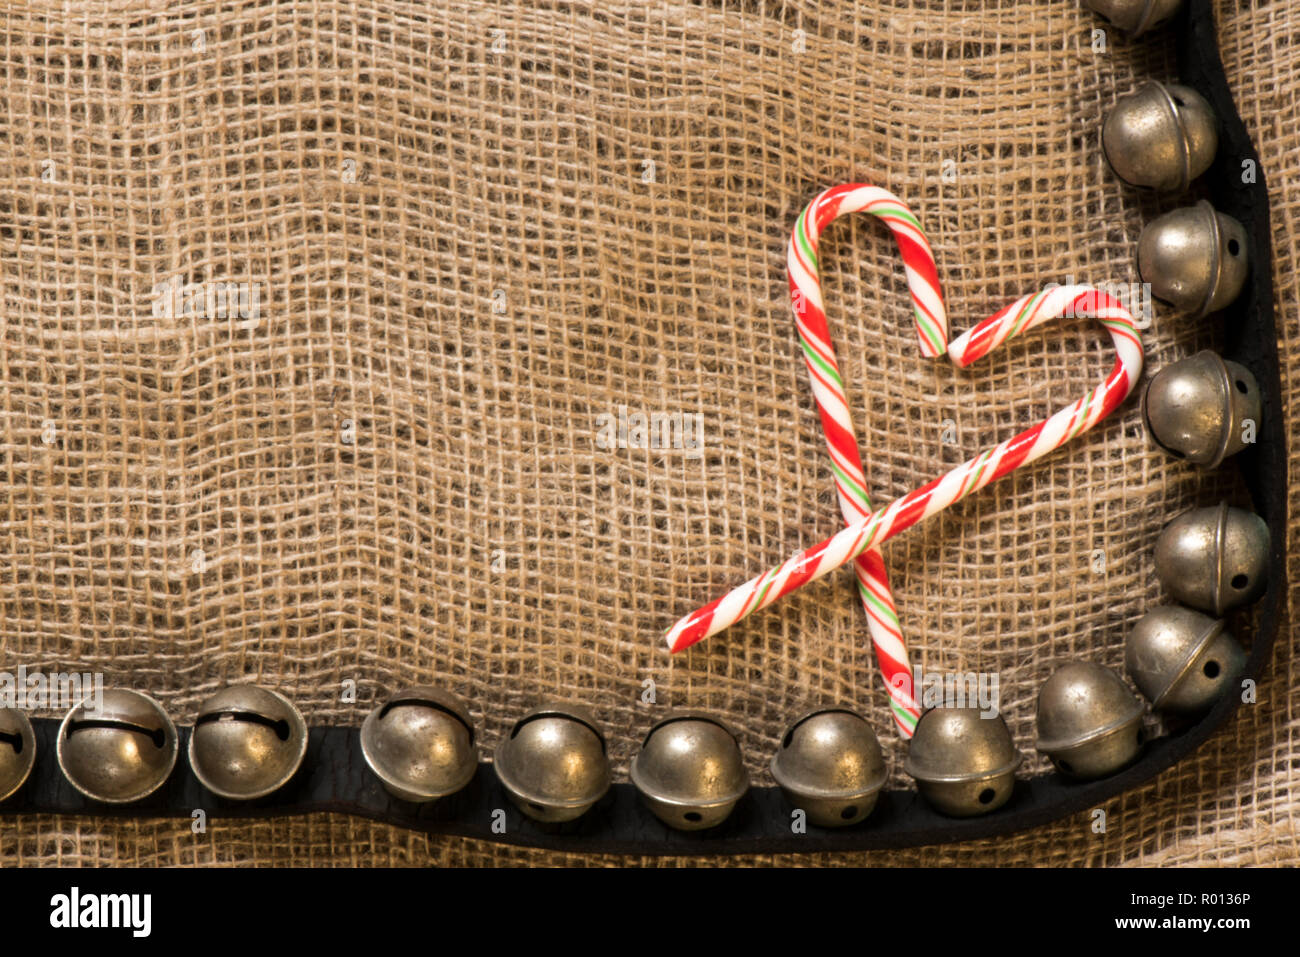 Antique sleigh bells and leather harness on burlap. Stock Photo